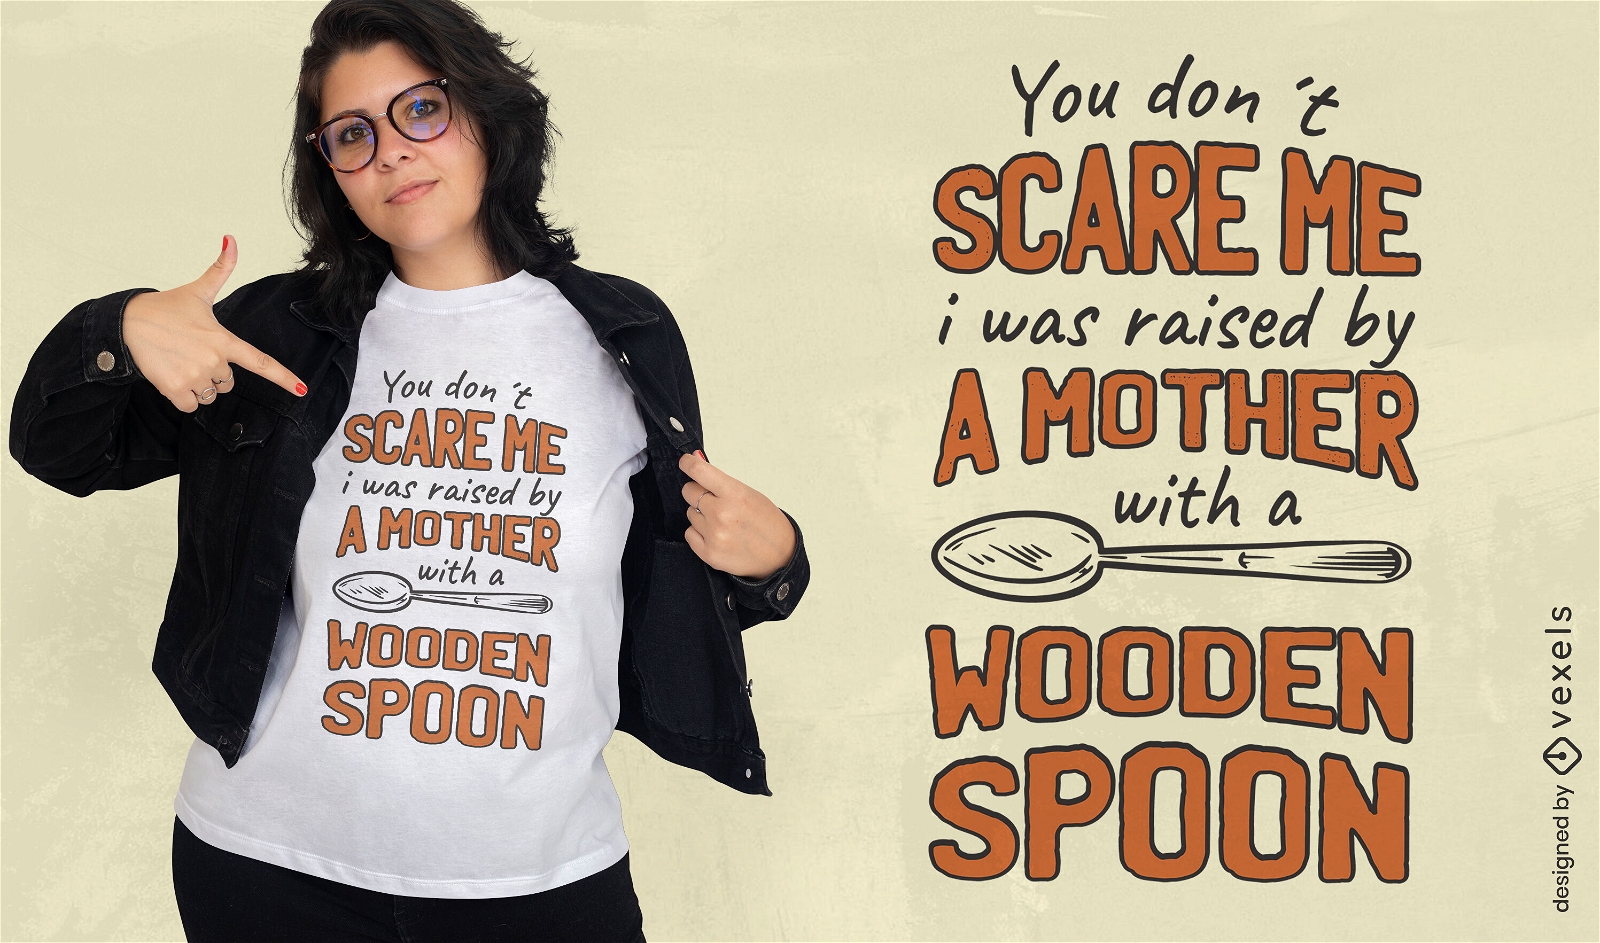 You don't scare me quote t-shirt design